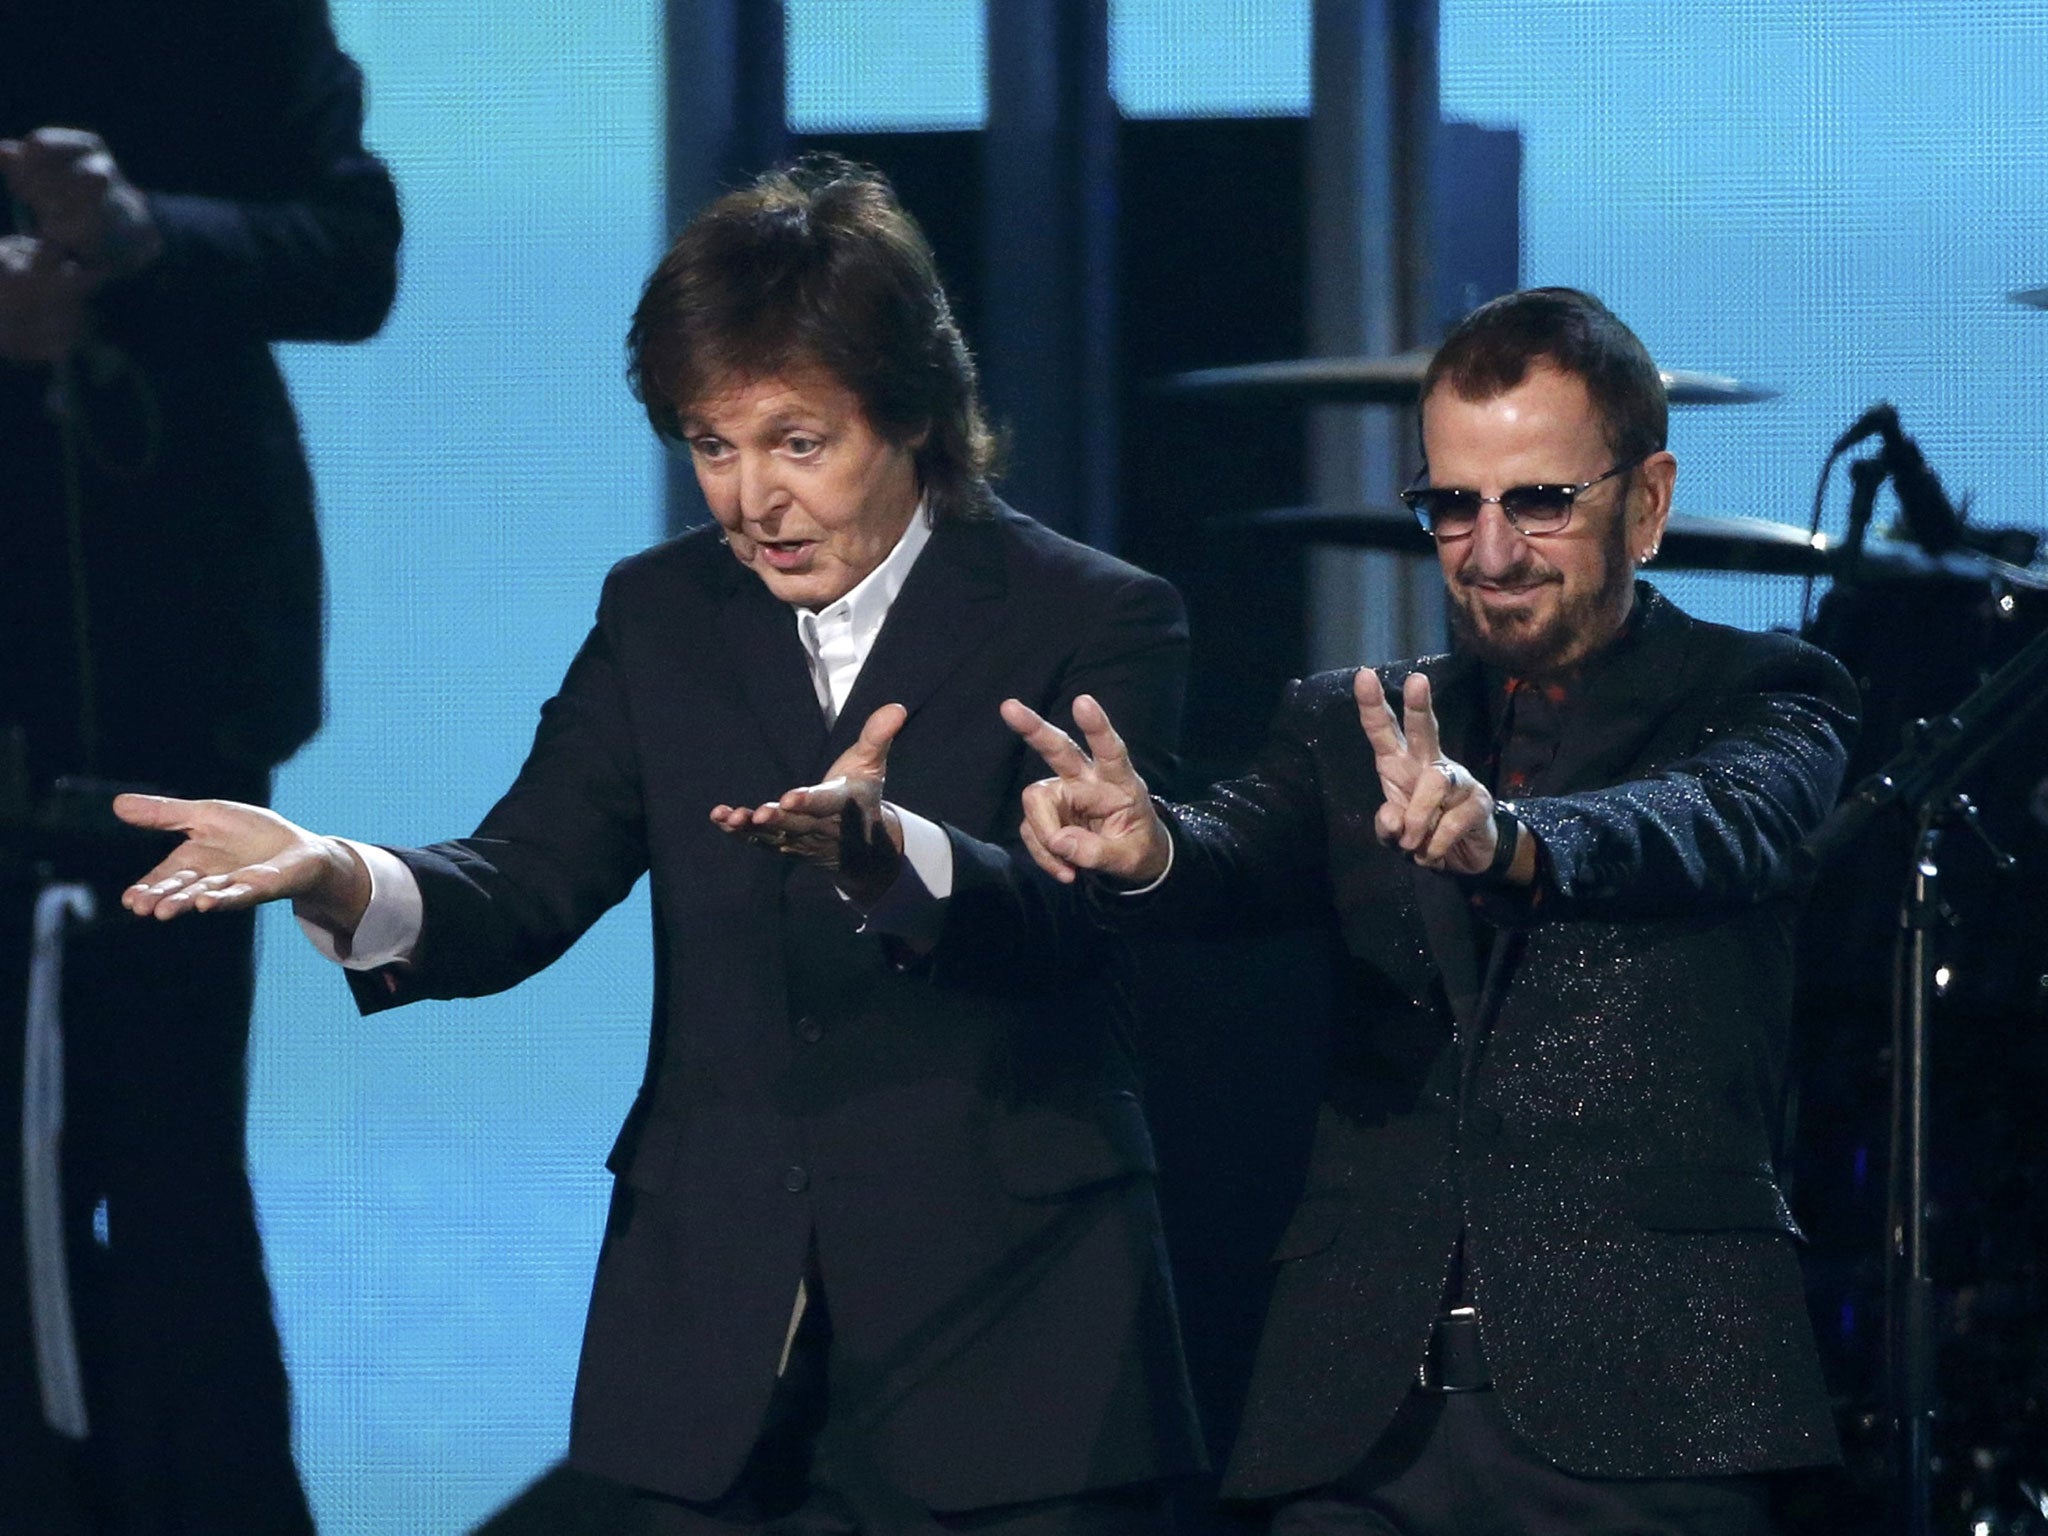 Paul McCartney and Ringo Starr performed